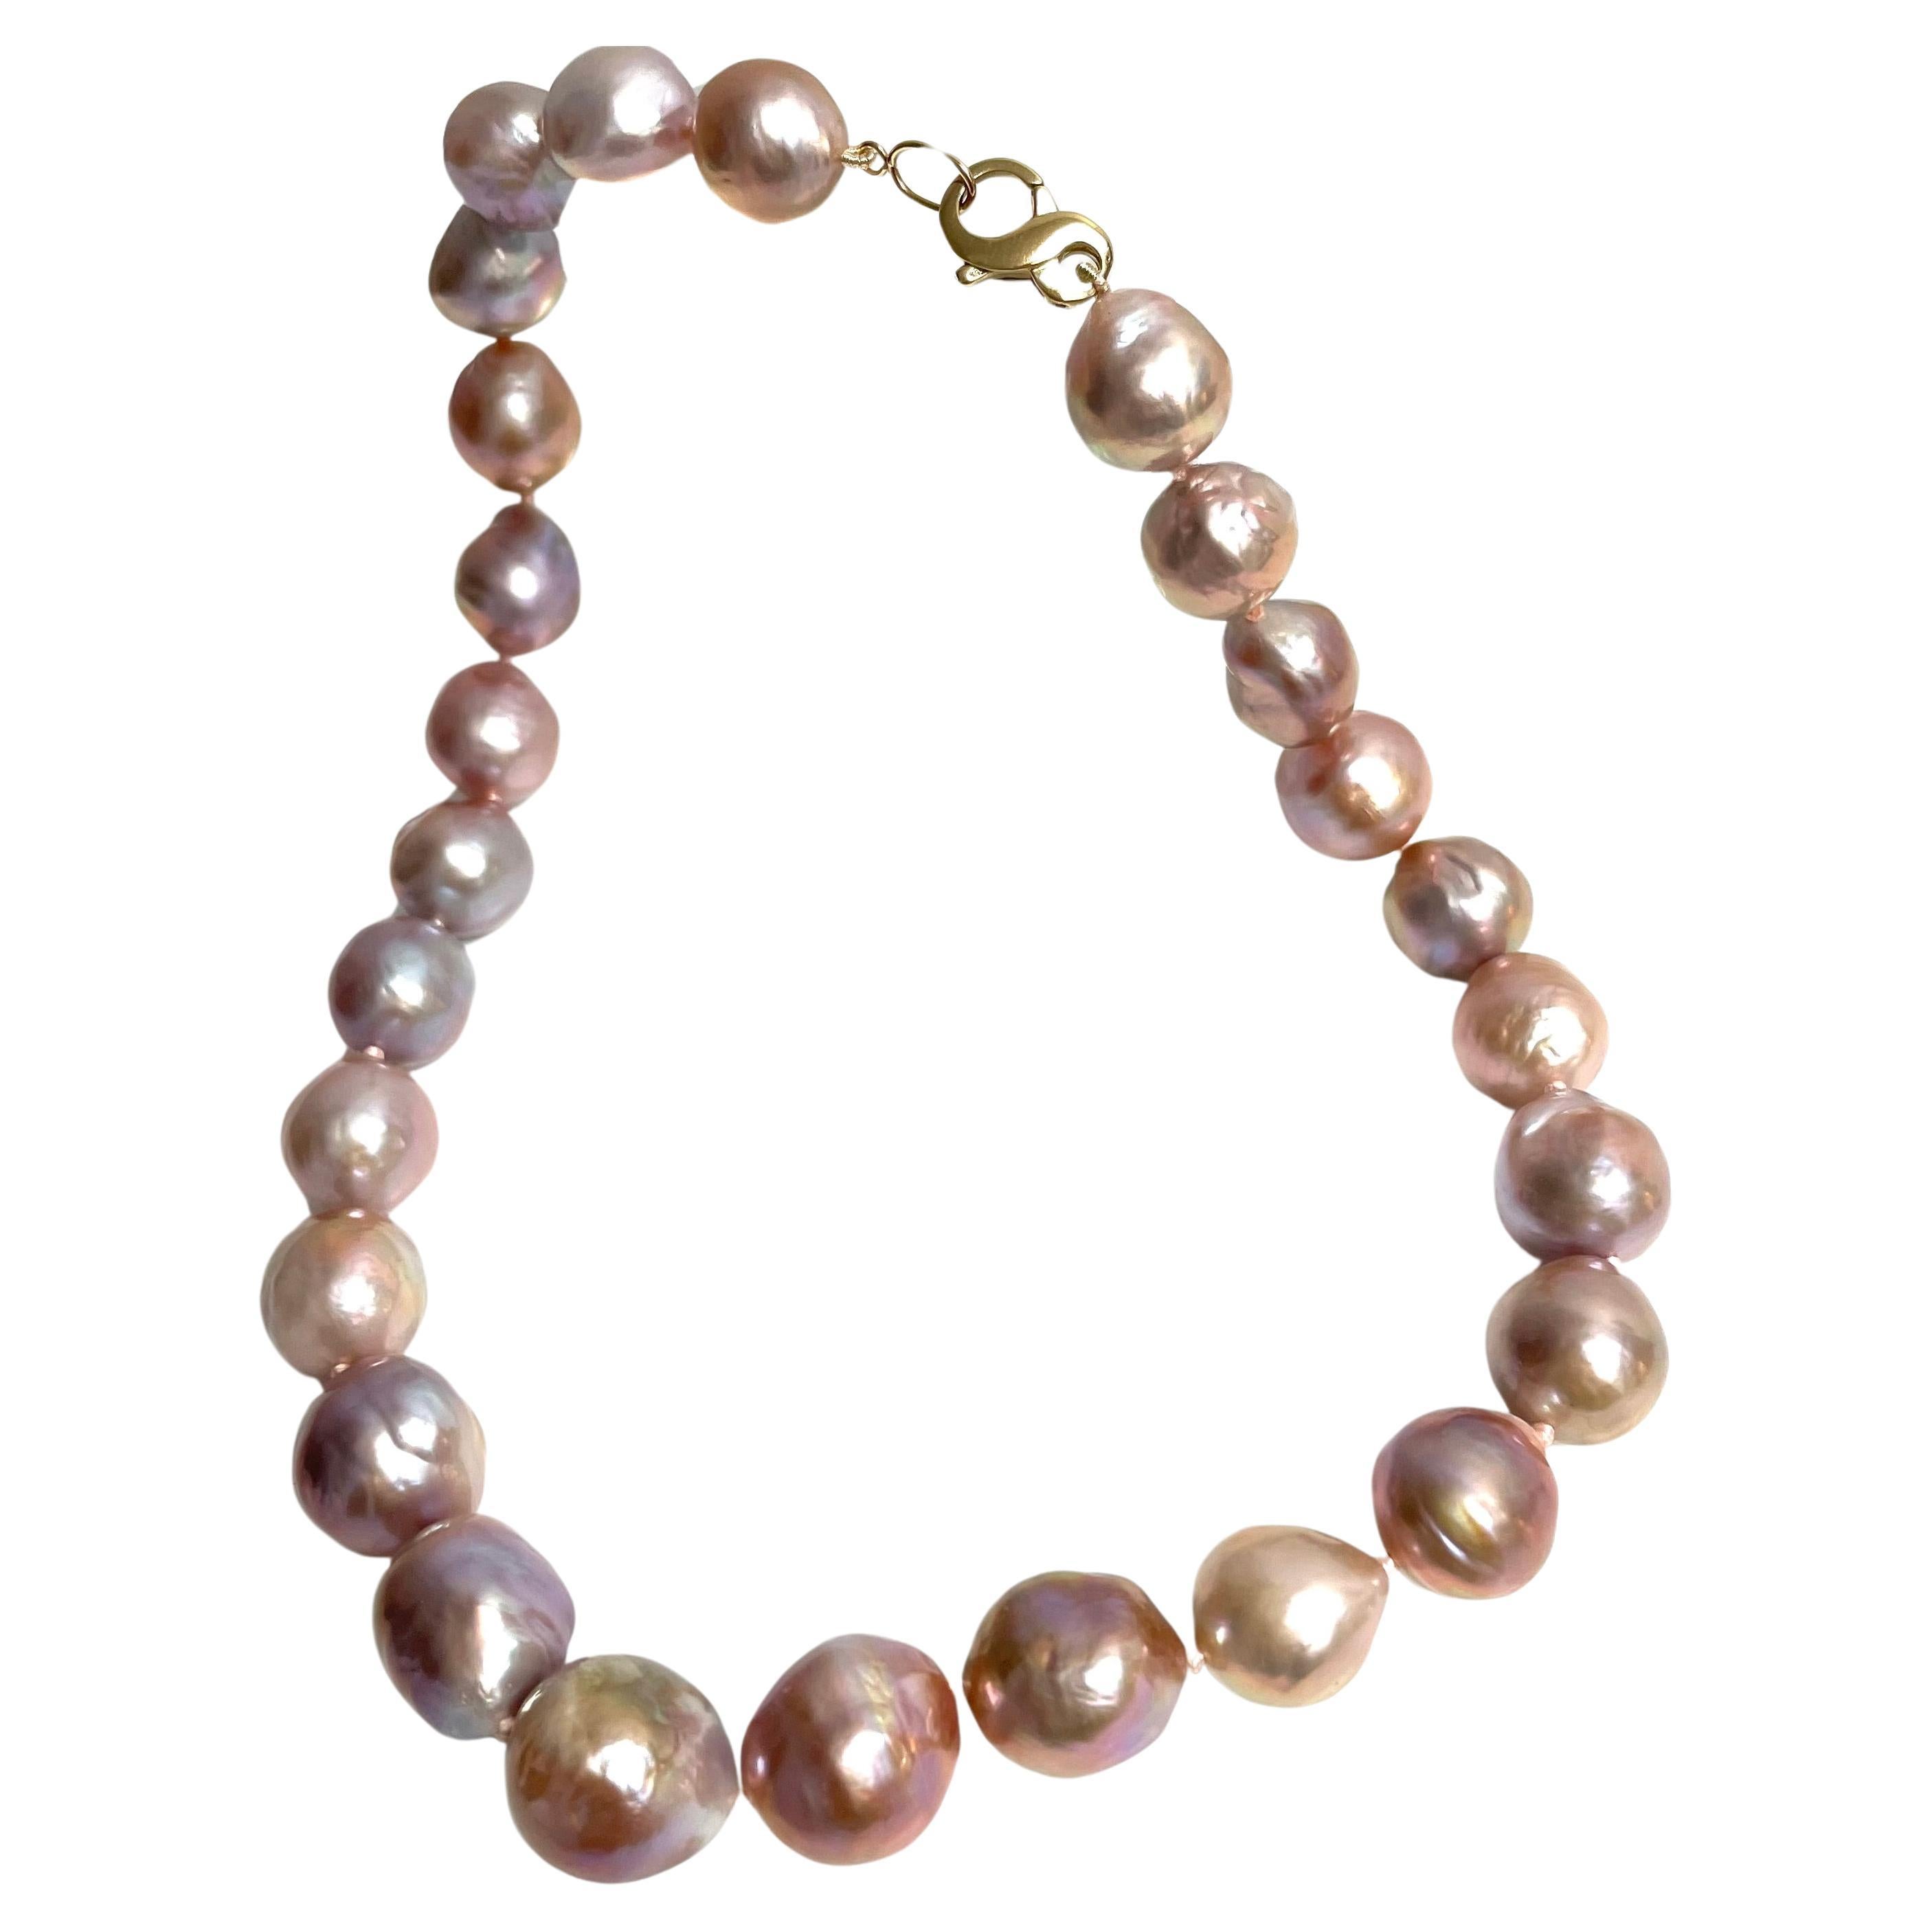 Description
A truly stunning necklace showcasing large 13 to 15 mm semi-baroque freshwater pearls in a unique harmonized variation of natural pink hues, with an unparalleled luster that adds to its timeless beauty.
Item # N3768
For a complete look,